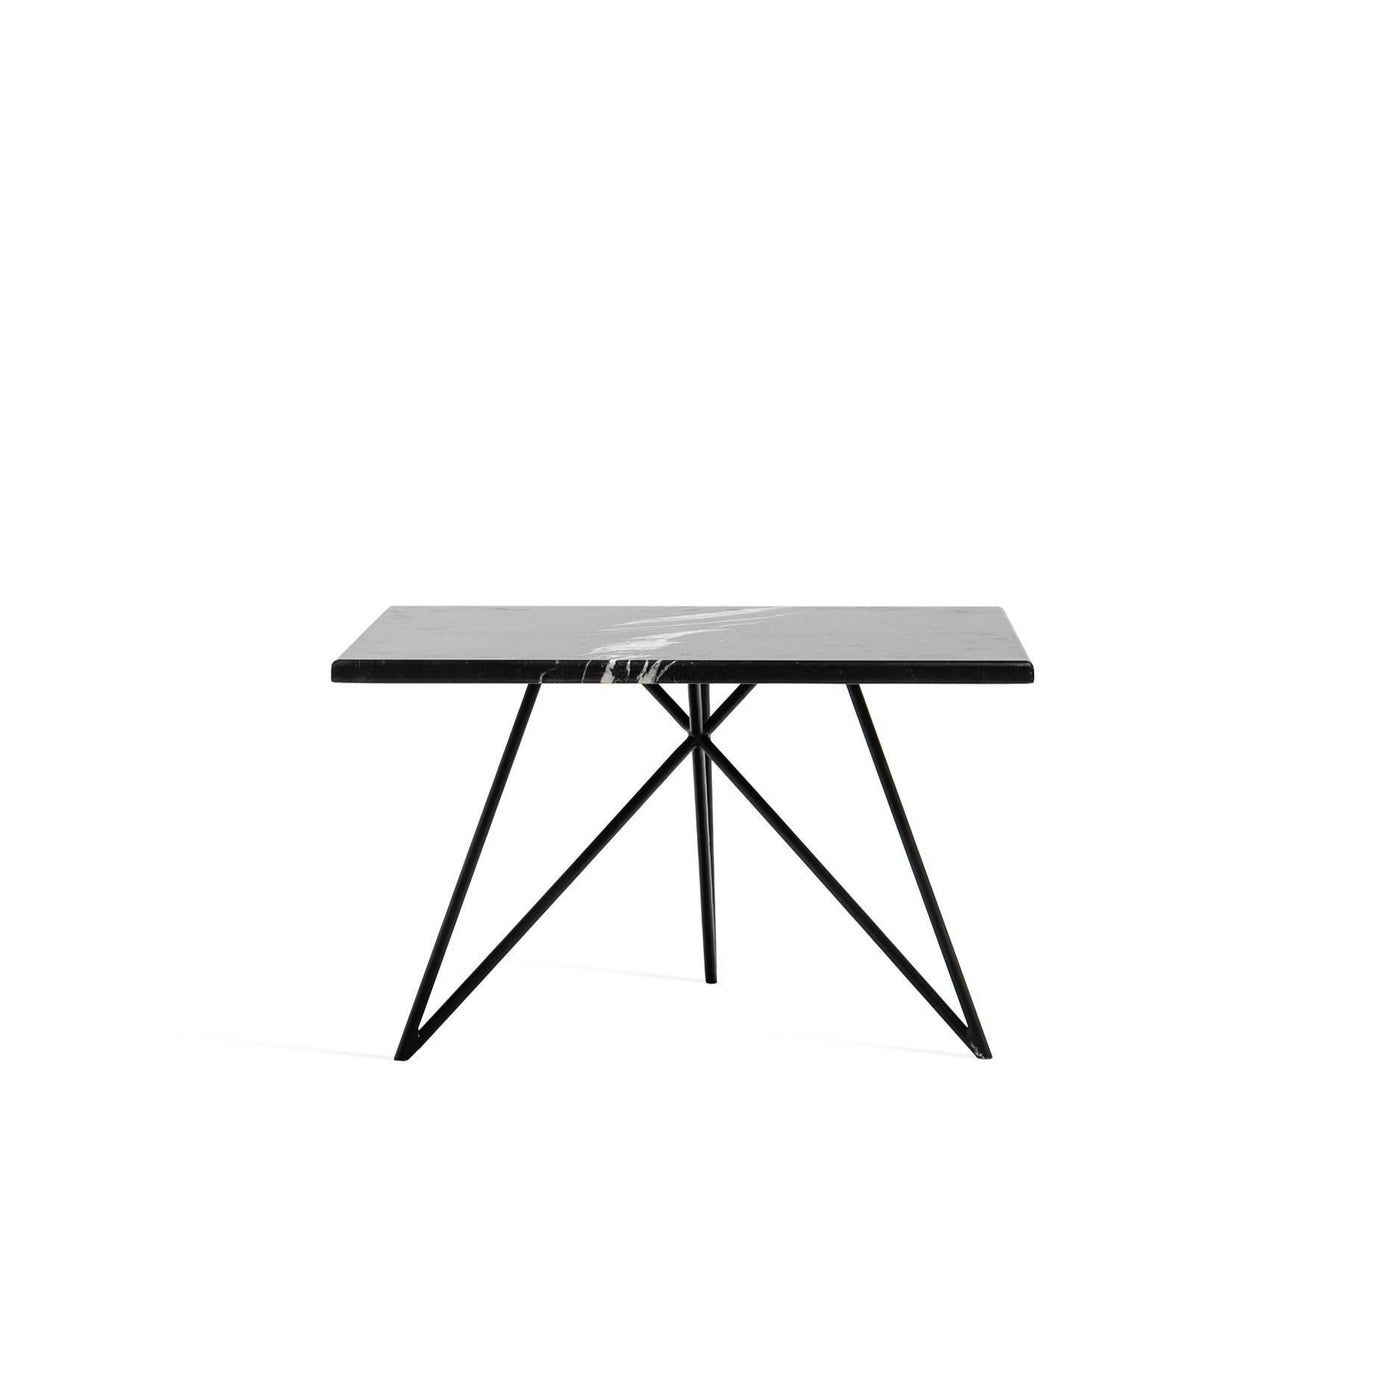 Stevie Marble Square Coffee Table with Nero Marquina Marble Top